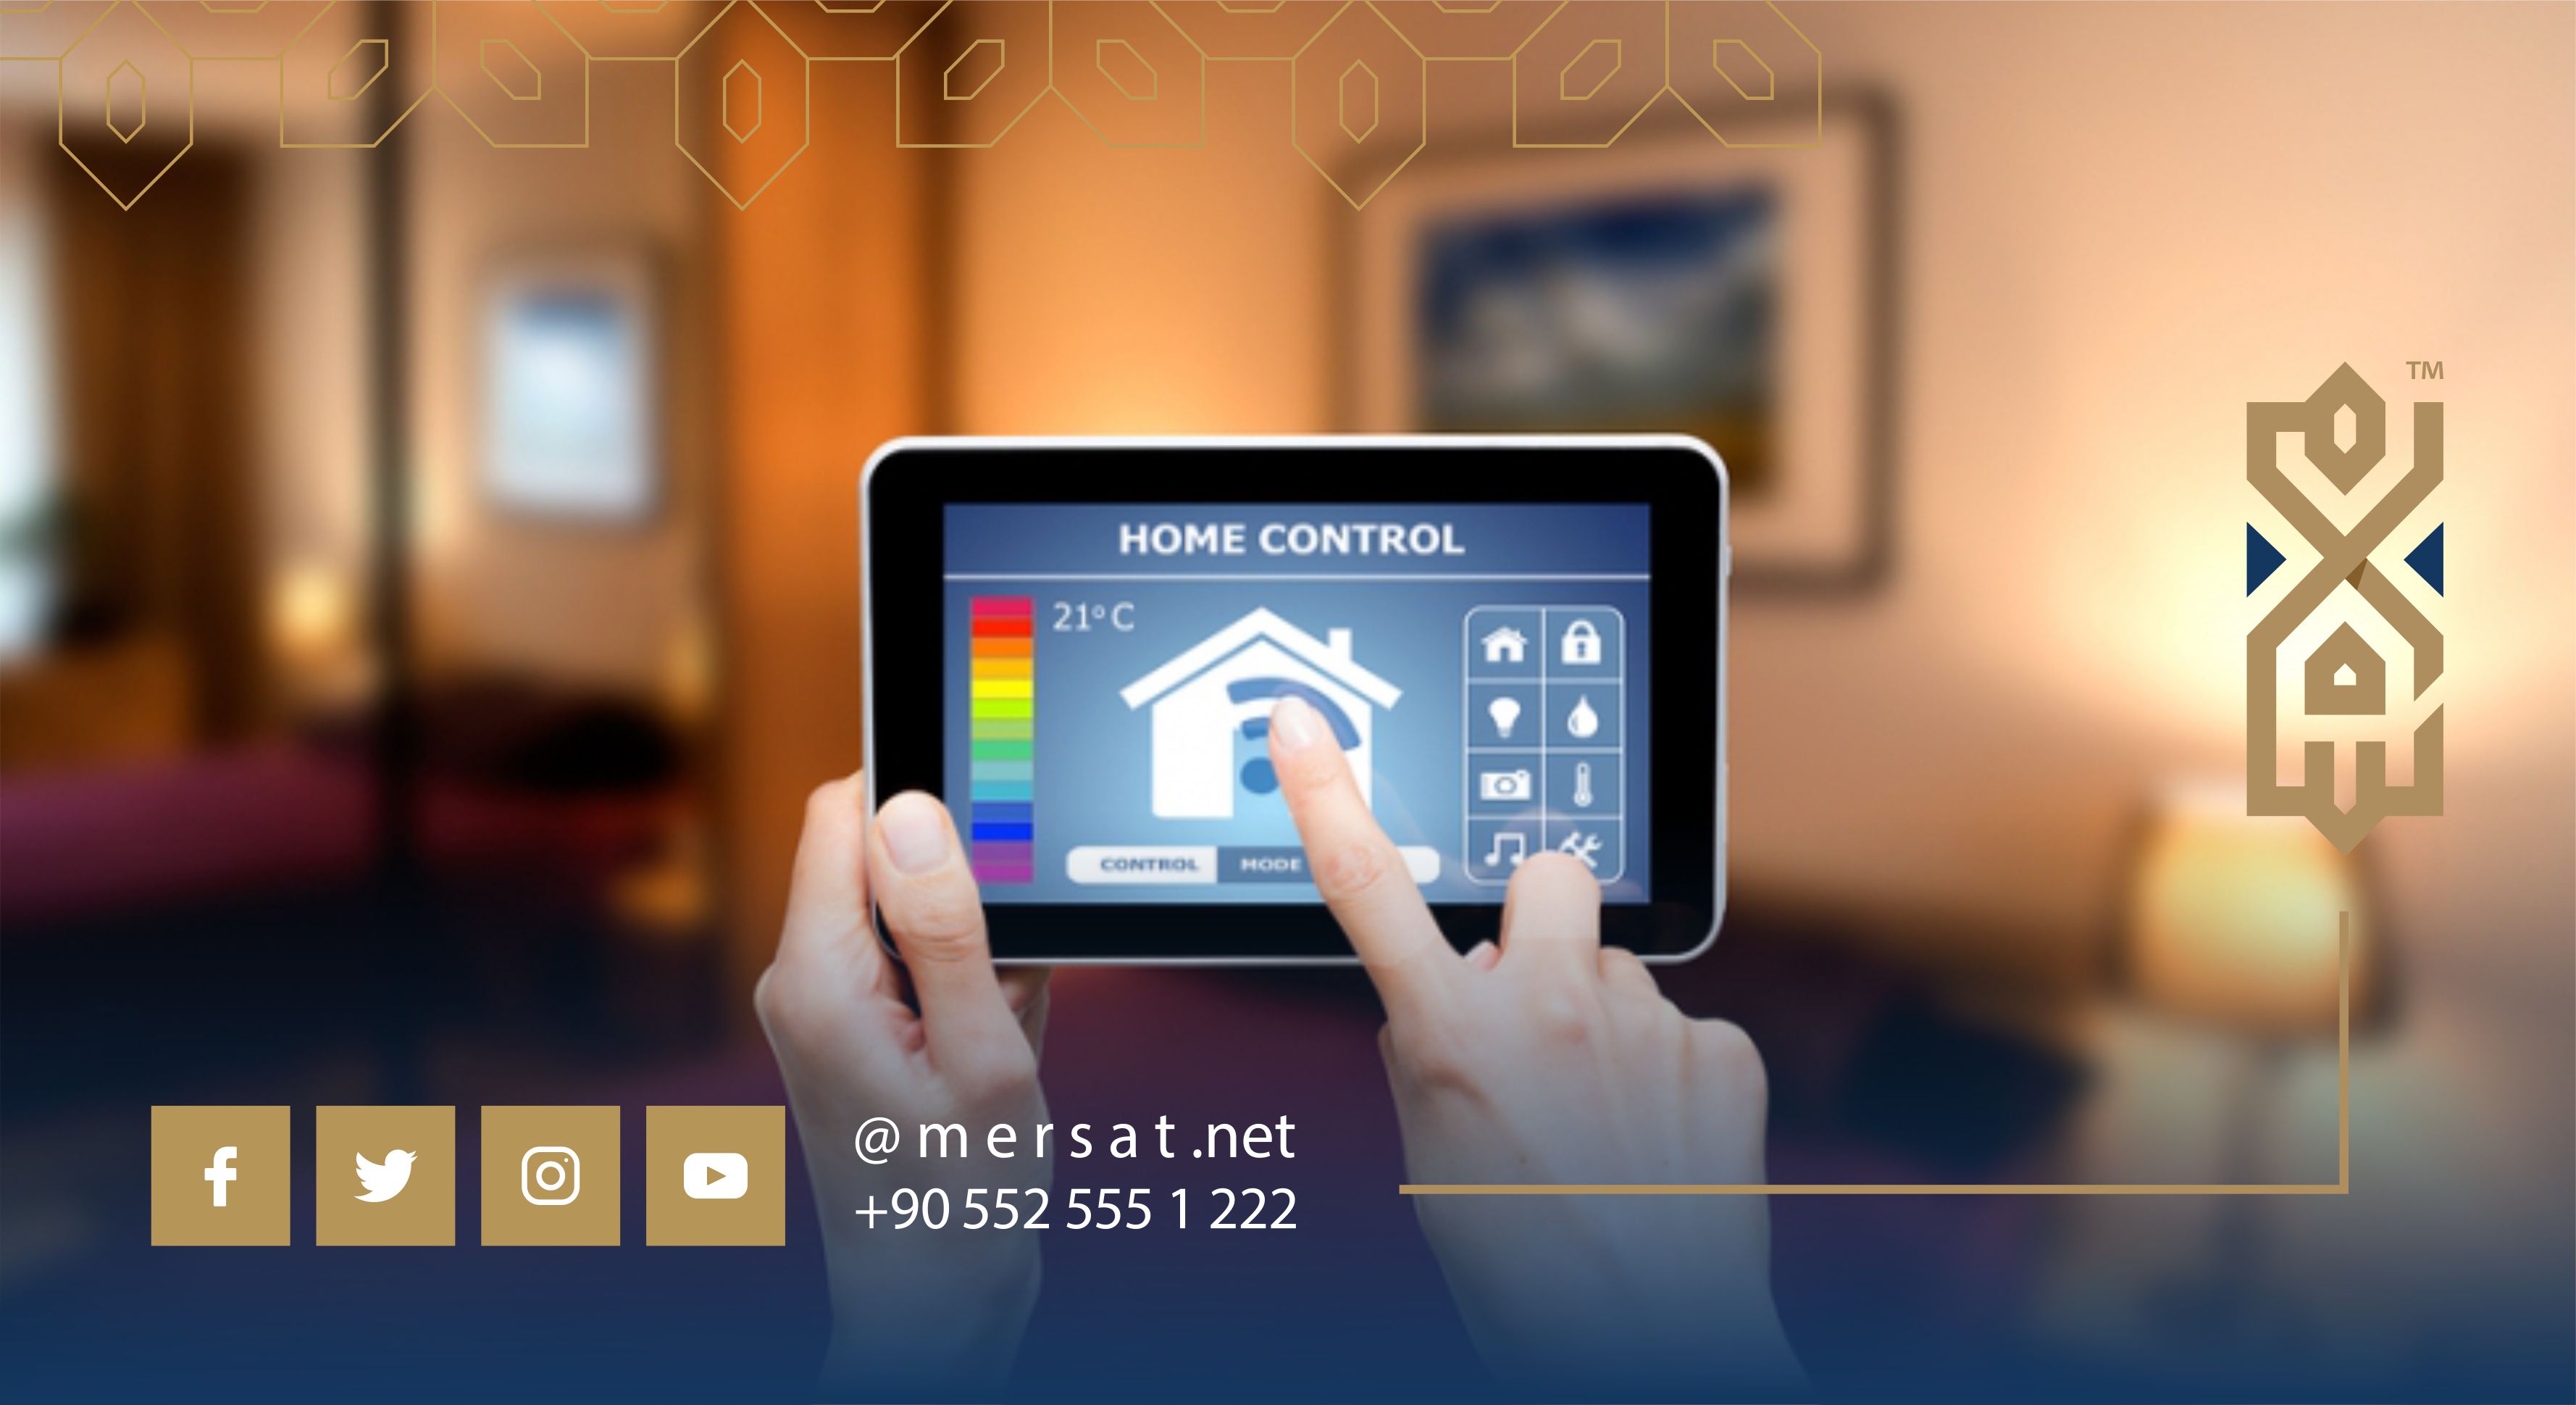 Smart systems provide their services in apartments of Turkey